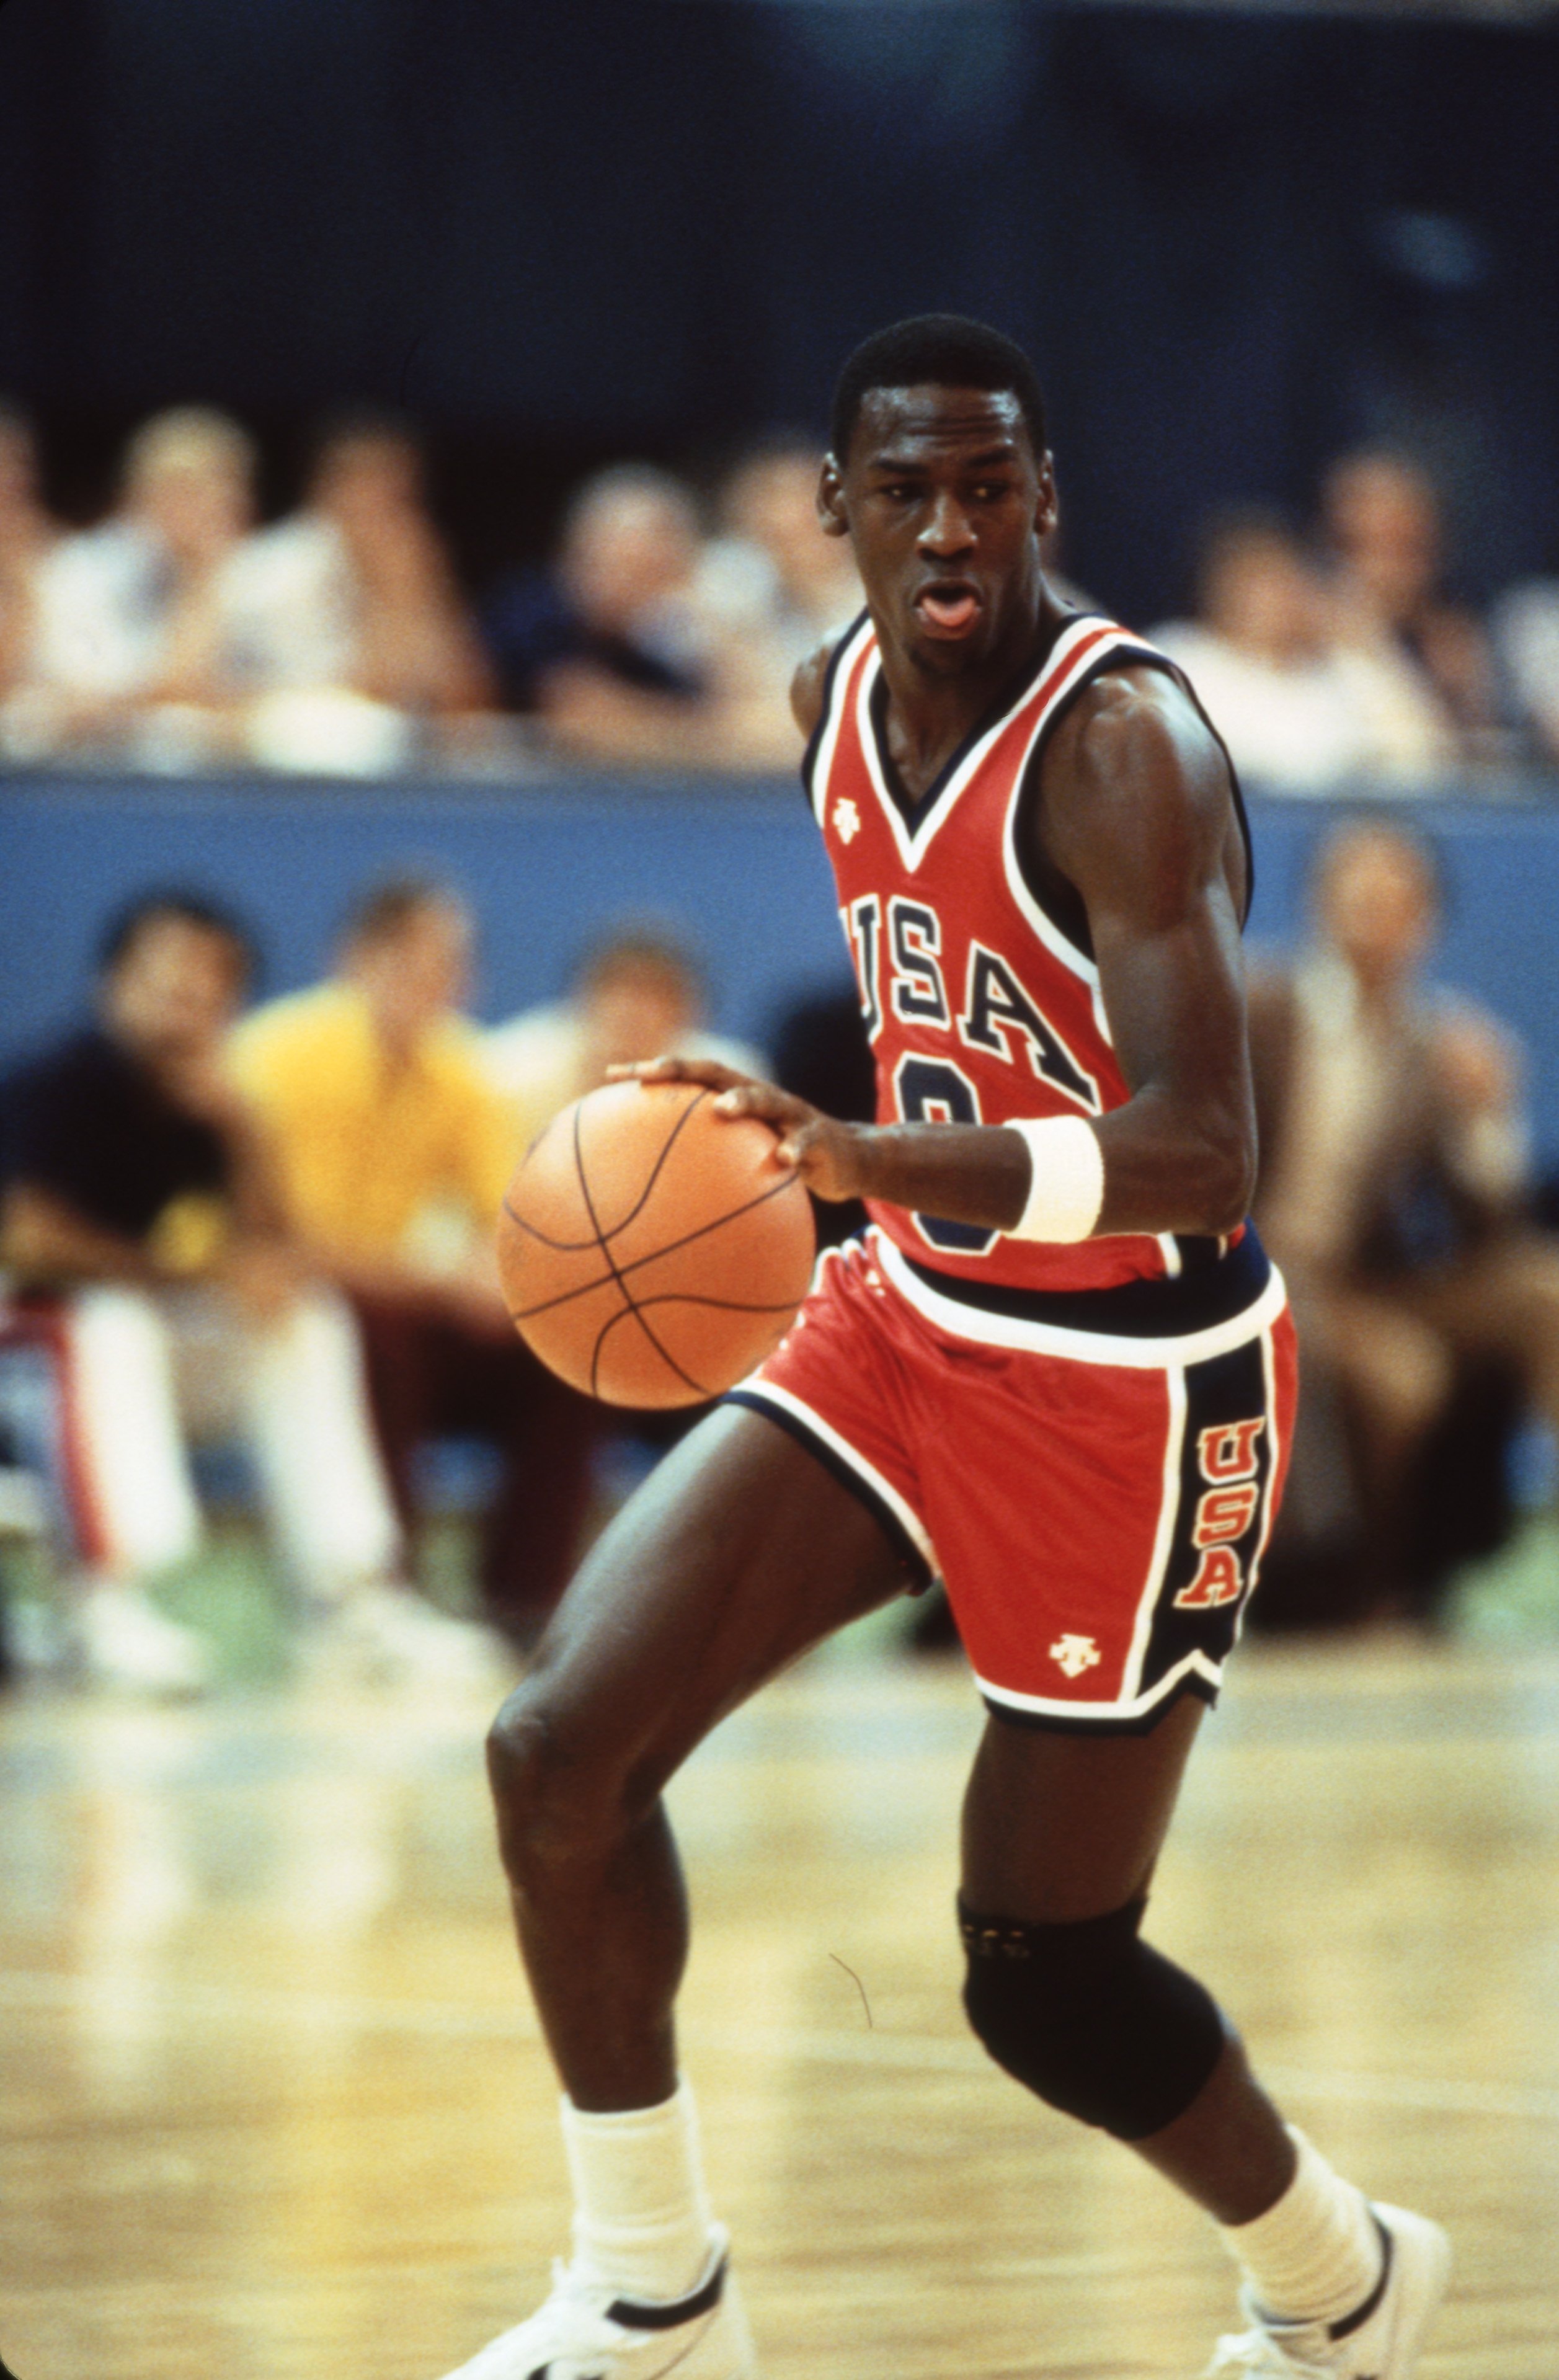 Michael Jordan playing for the U.S. Men's Basketball team playing at 1984 Olympics at the Los Angeles Memorial Coliseum | Source: Getty Images